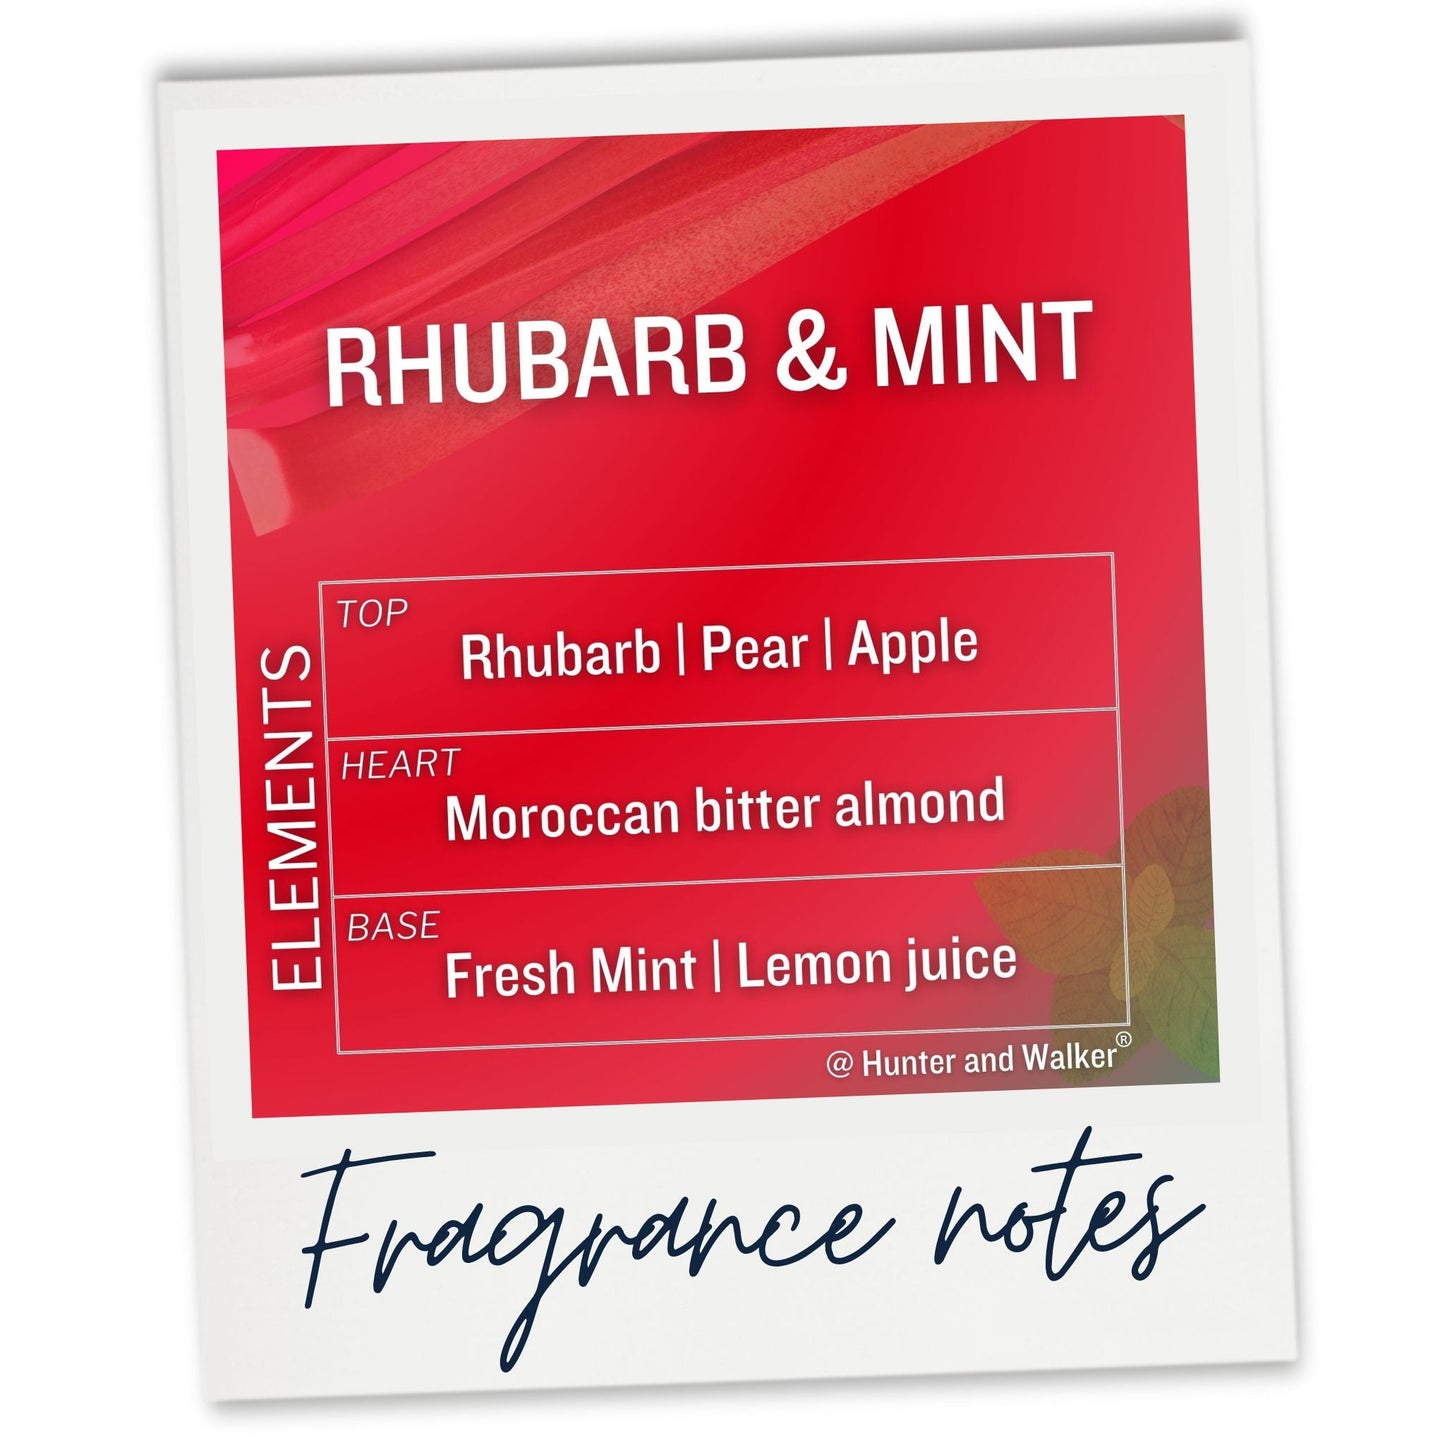 The fragrance notes of Rhubarb and Mint scent